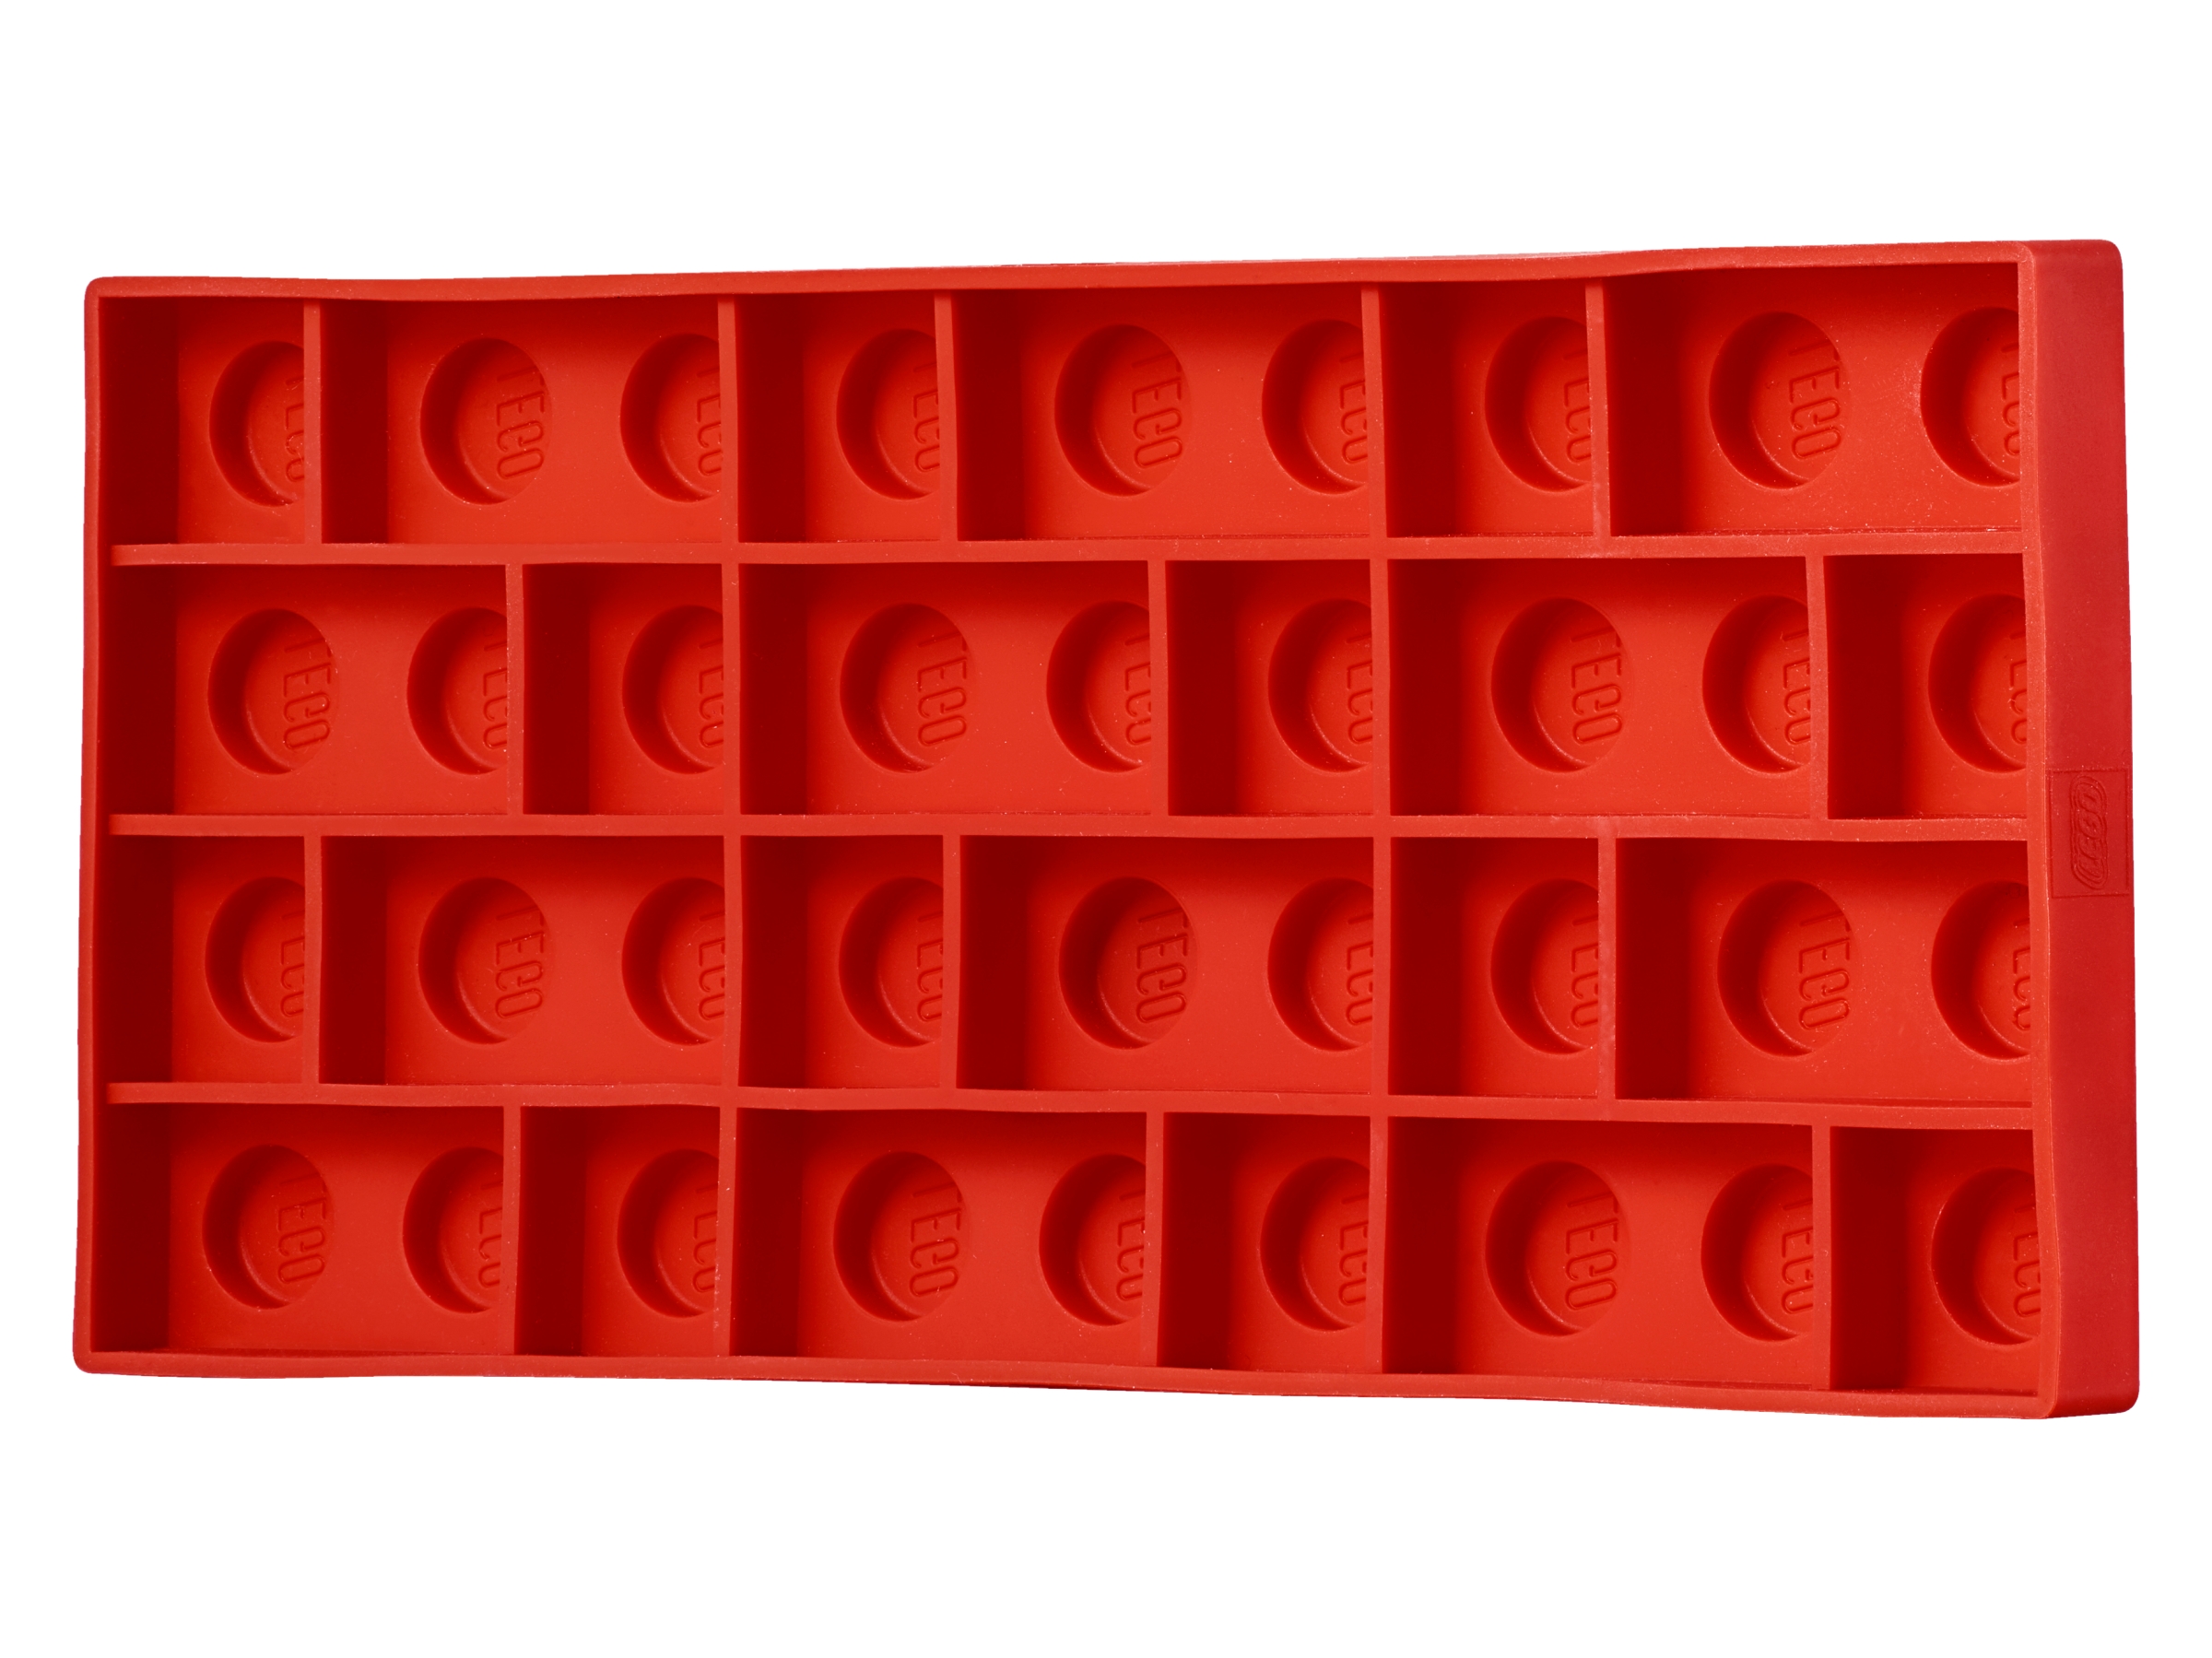 Lego Character 1-pack Ice Trays